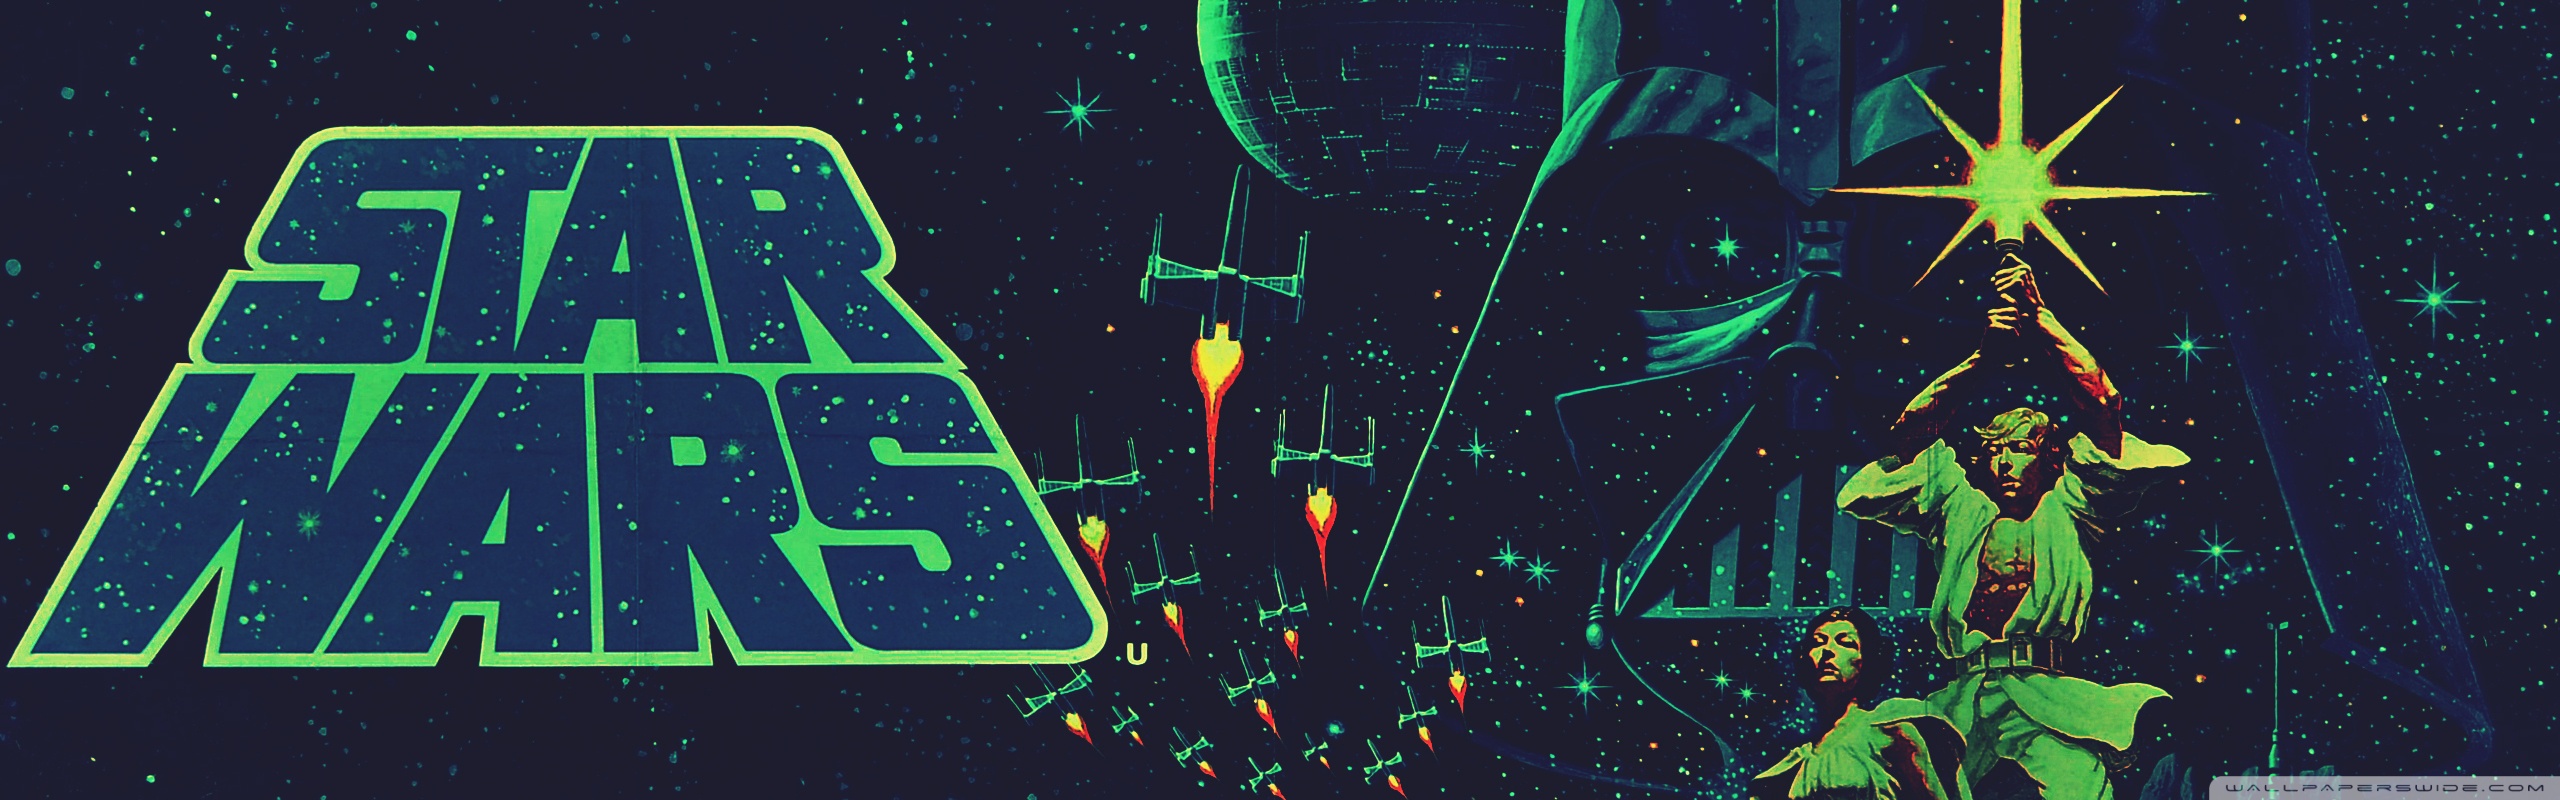 star wars dual screen wallpaper,green,font,space,technology,animation